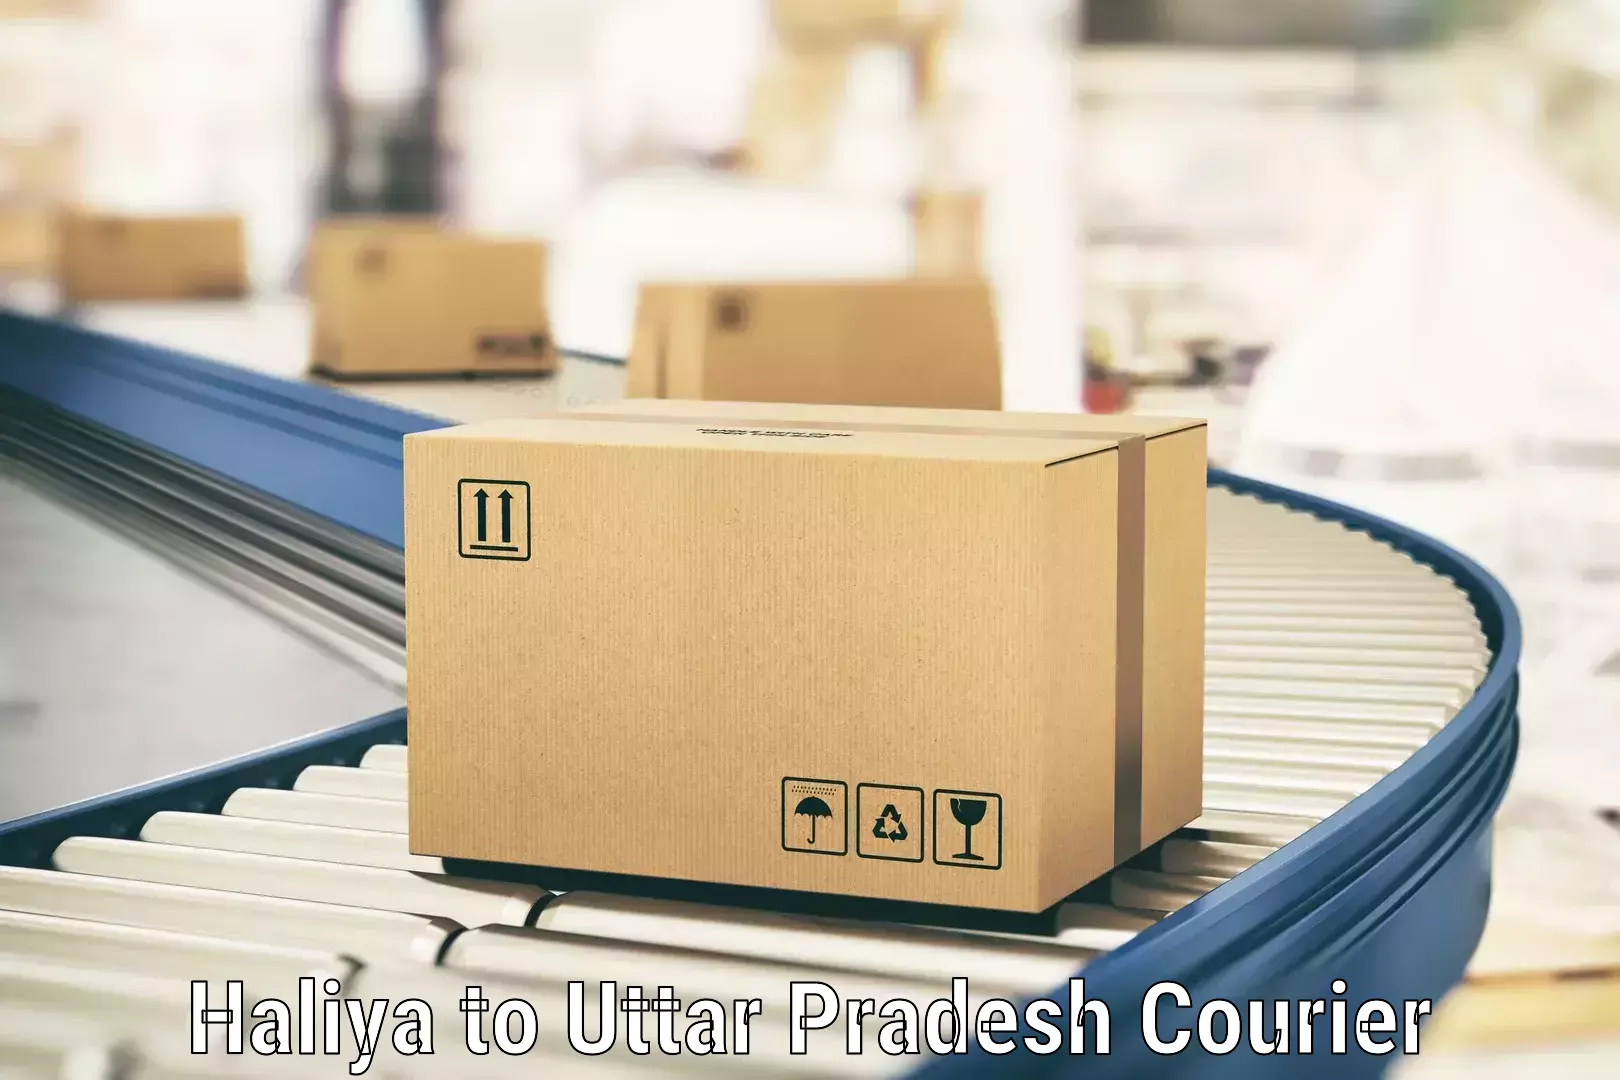 Efficient shipping operations in Haliya to Agra